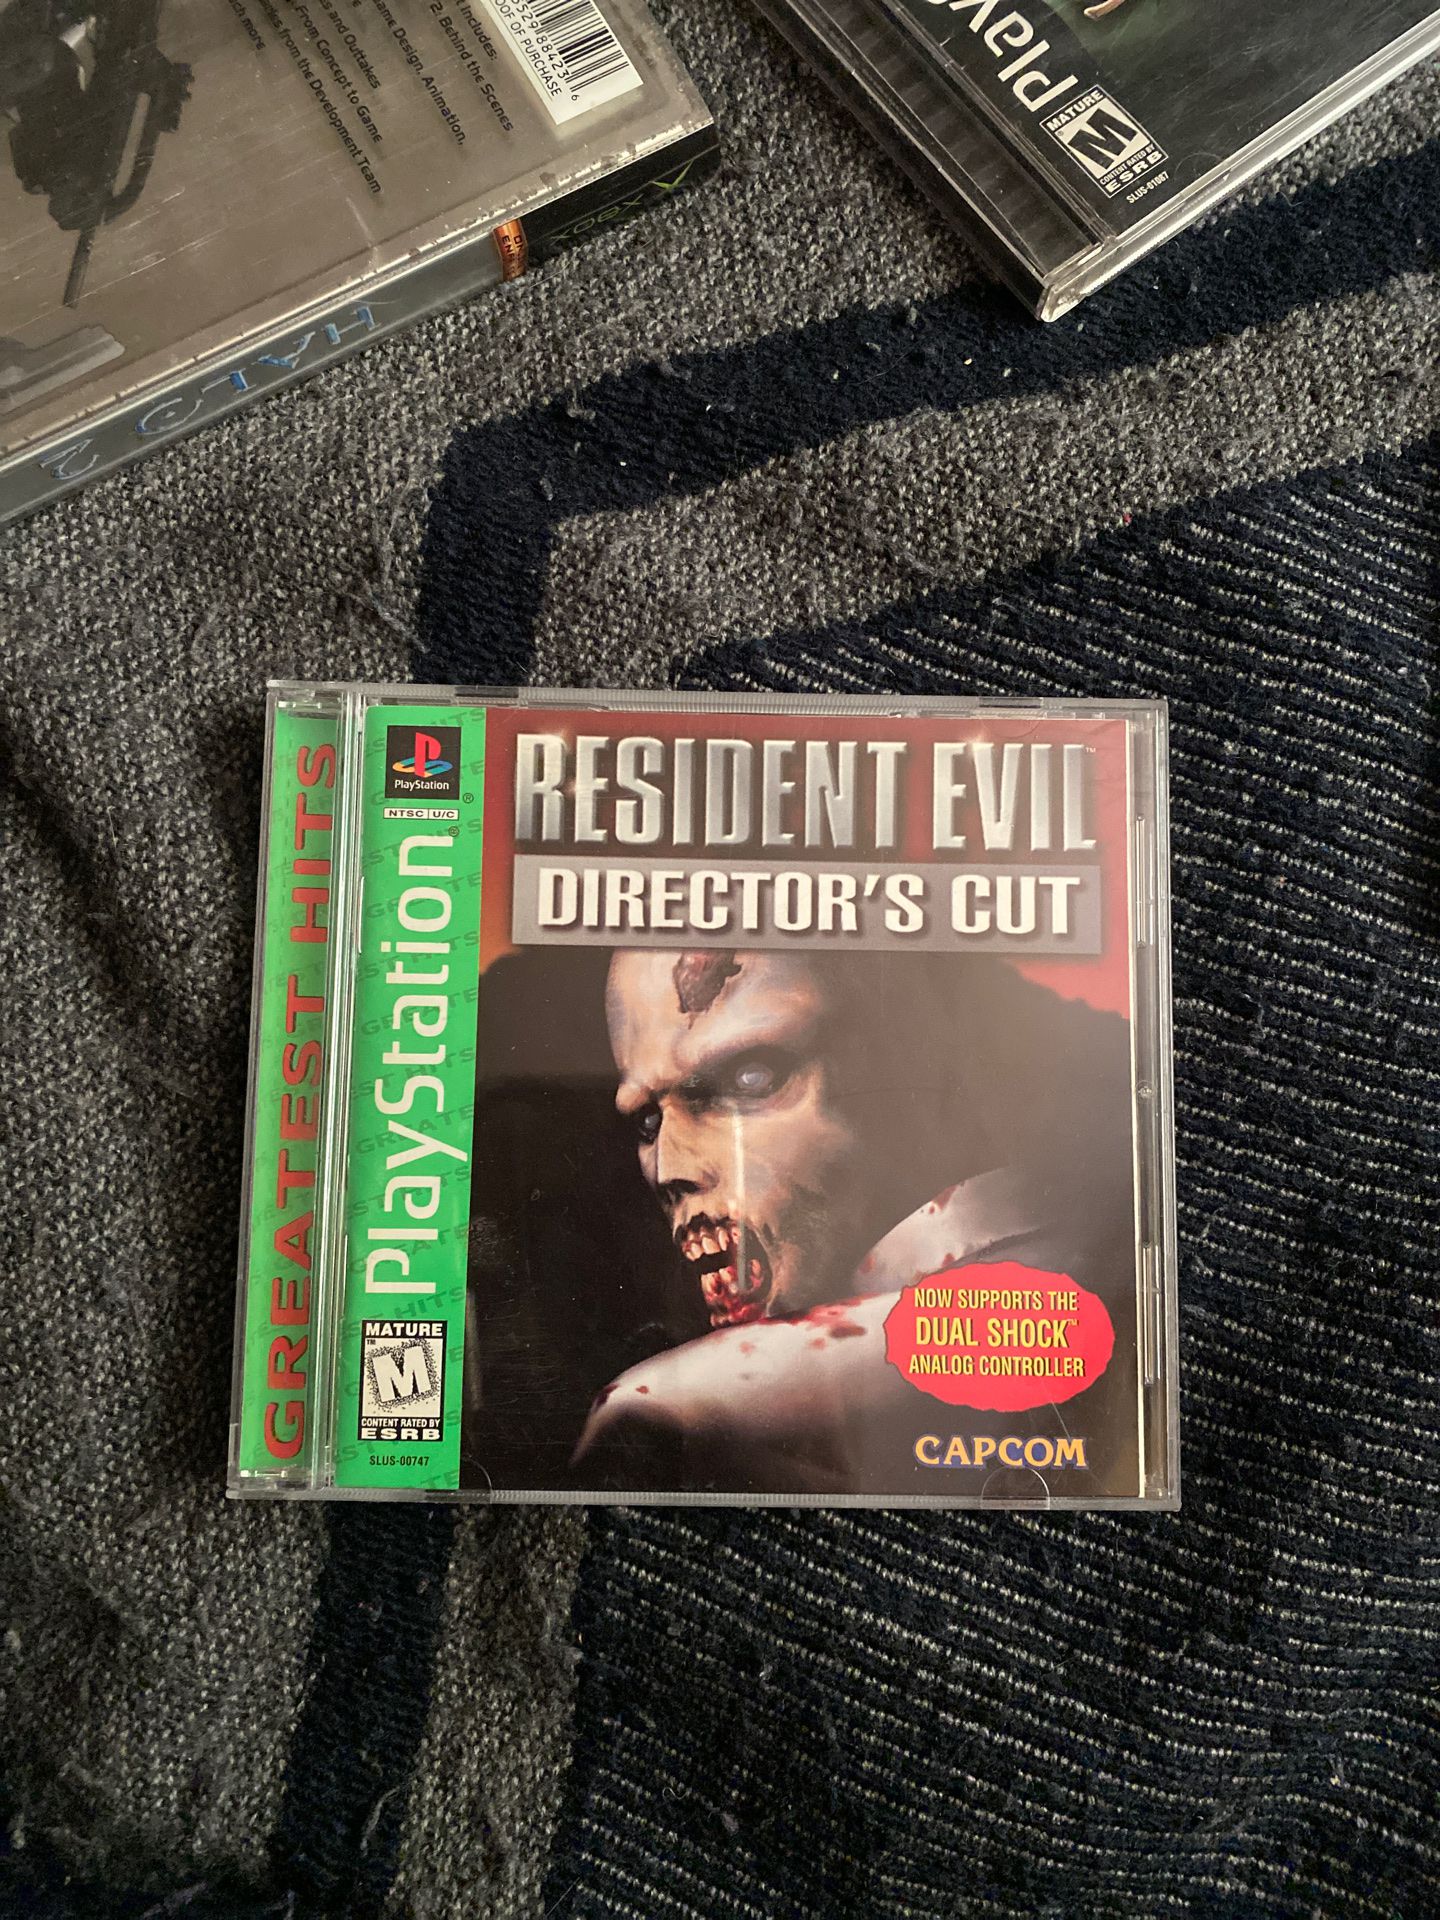 Resident evil Ps1 10/10 condition